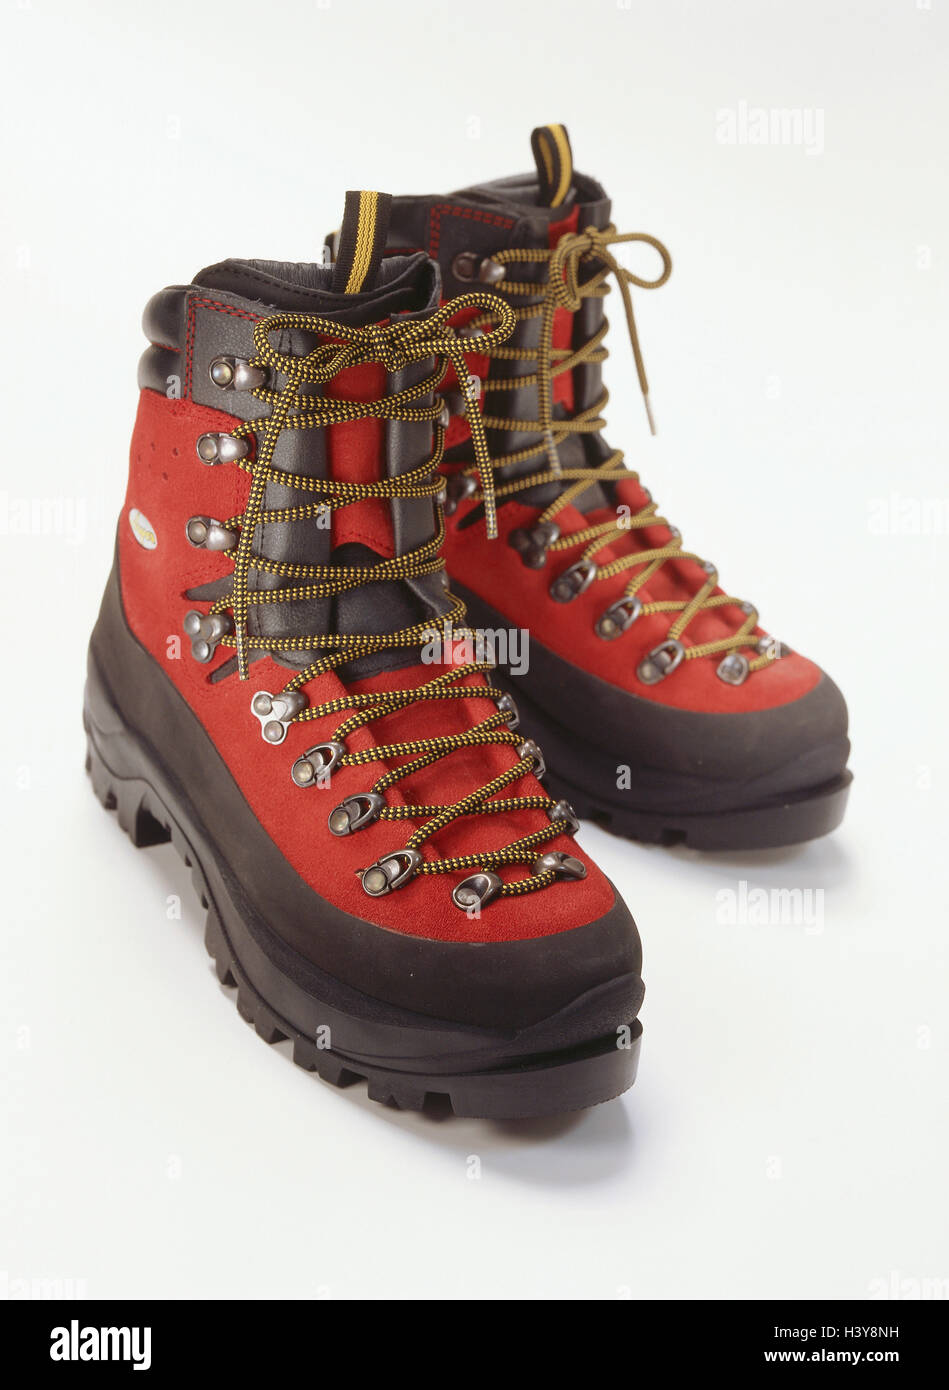 Full speed shoes, climbing iron-solidly, shoes, shoe couple, footwear, climbing boots, stably, robustly, resistantly, alpine equipment, Alpinistik, anew, uncarried, unused, Still life, material recording, studio, copy space, Stock Photo